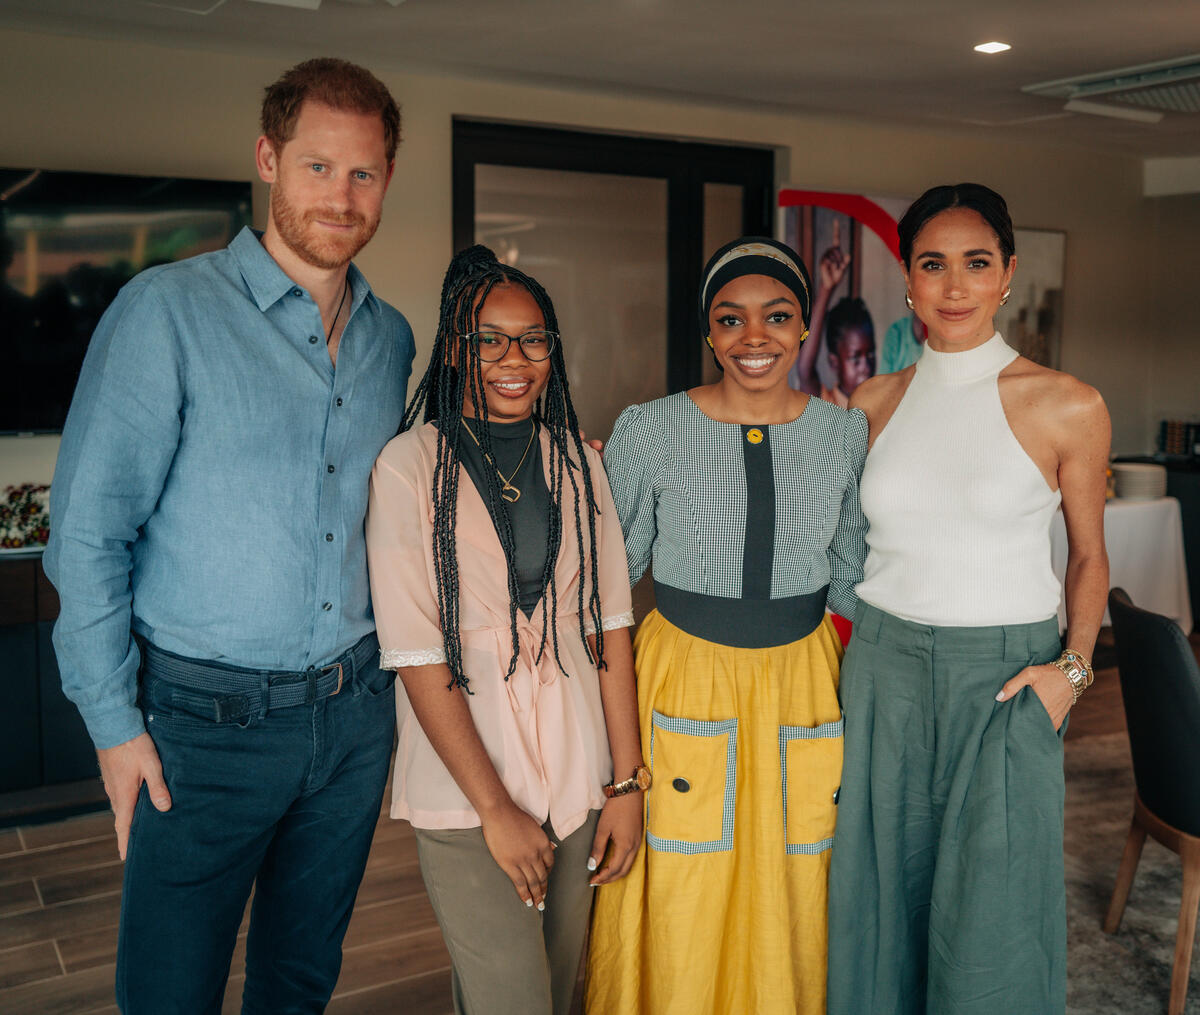 The Duke and Duchess of Sussex met our Youth Ambassadors Maryam and Purity in Nigeria who are tireless advocates for children's rights.

Thank you Prince Harry and Meghan for joining us to learn more about how we ensure children don’t just survive but thrive ❤️